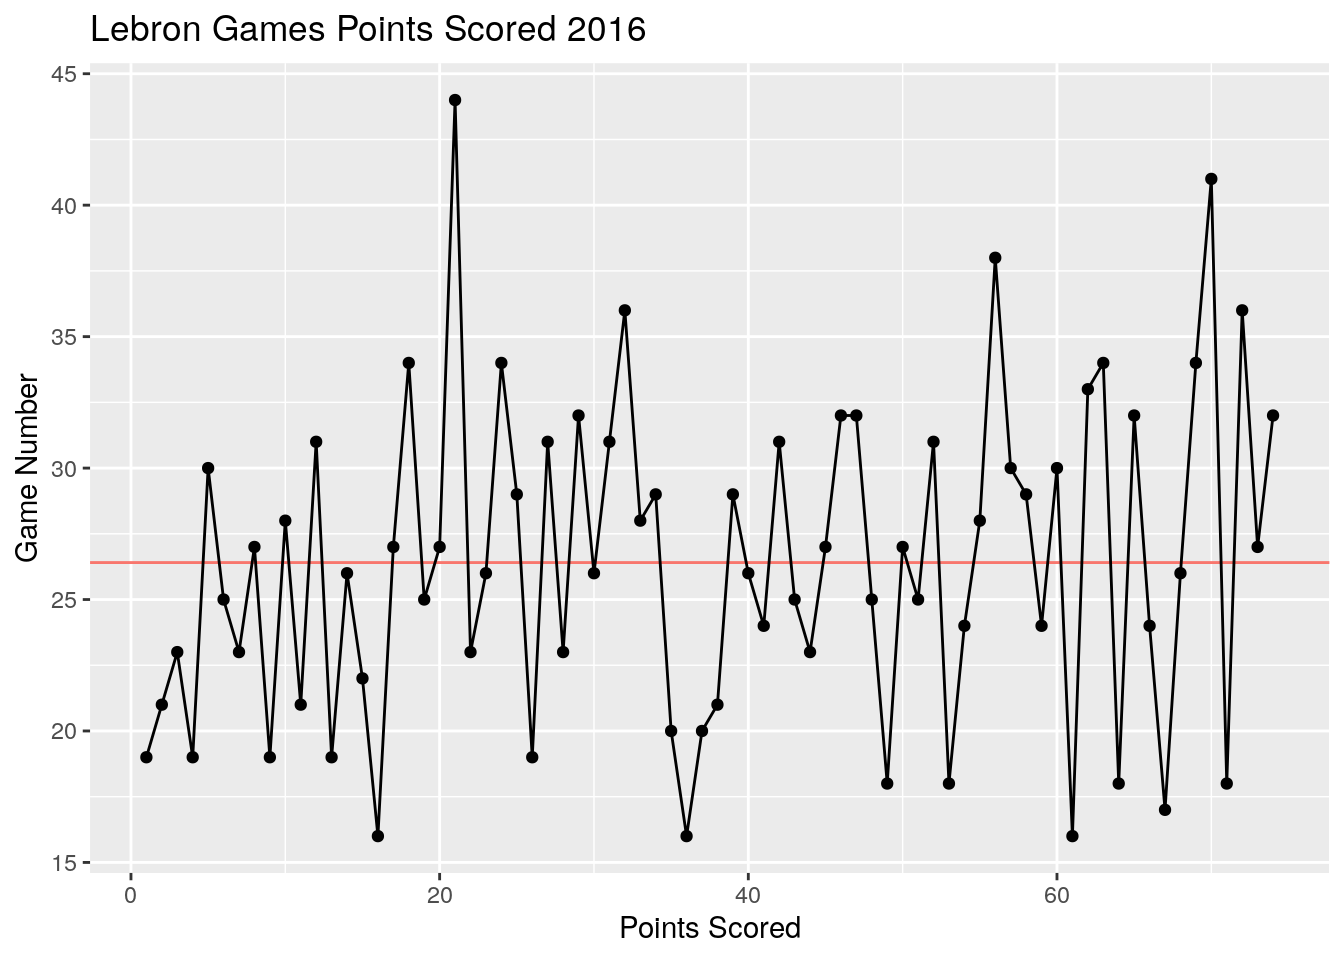 Regression to the mean in points scored in games by Lebron James in 2016. Notice how his best games tend to be followed by worse performances. His worst games are usually followed by an improvement. The horizontal red line shows his season average.